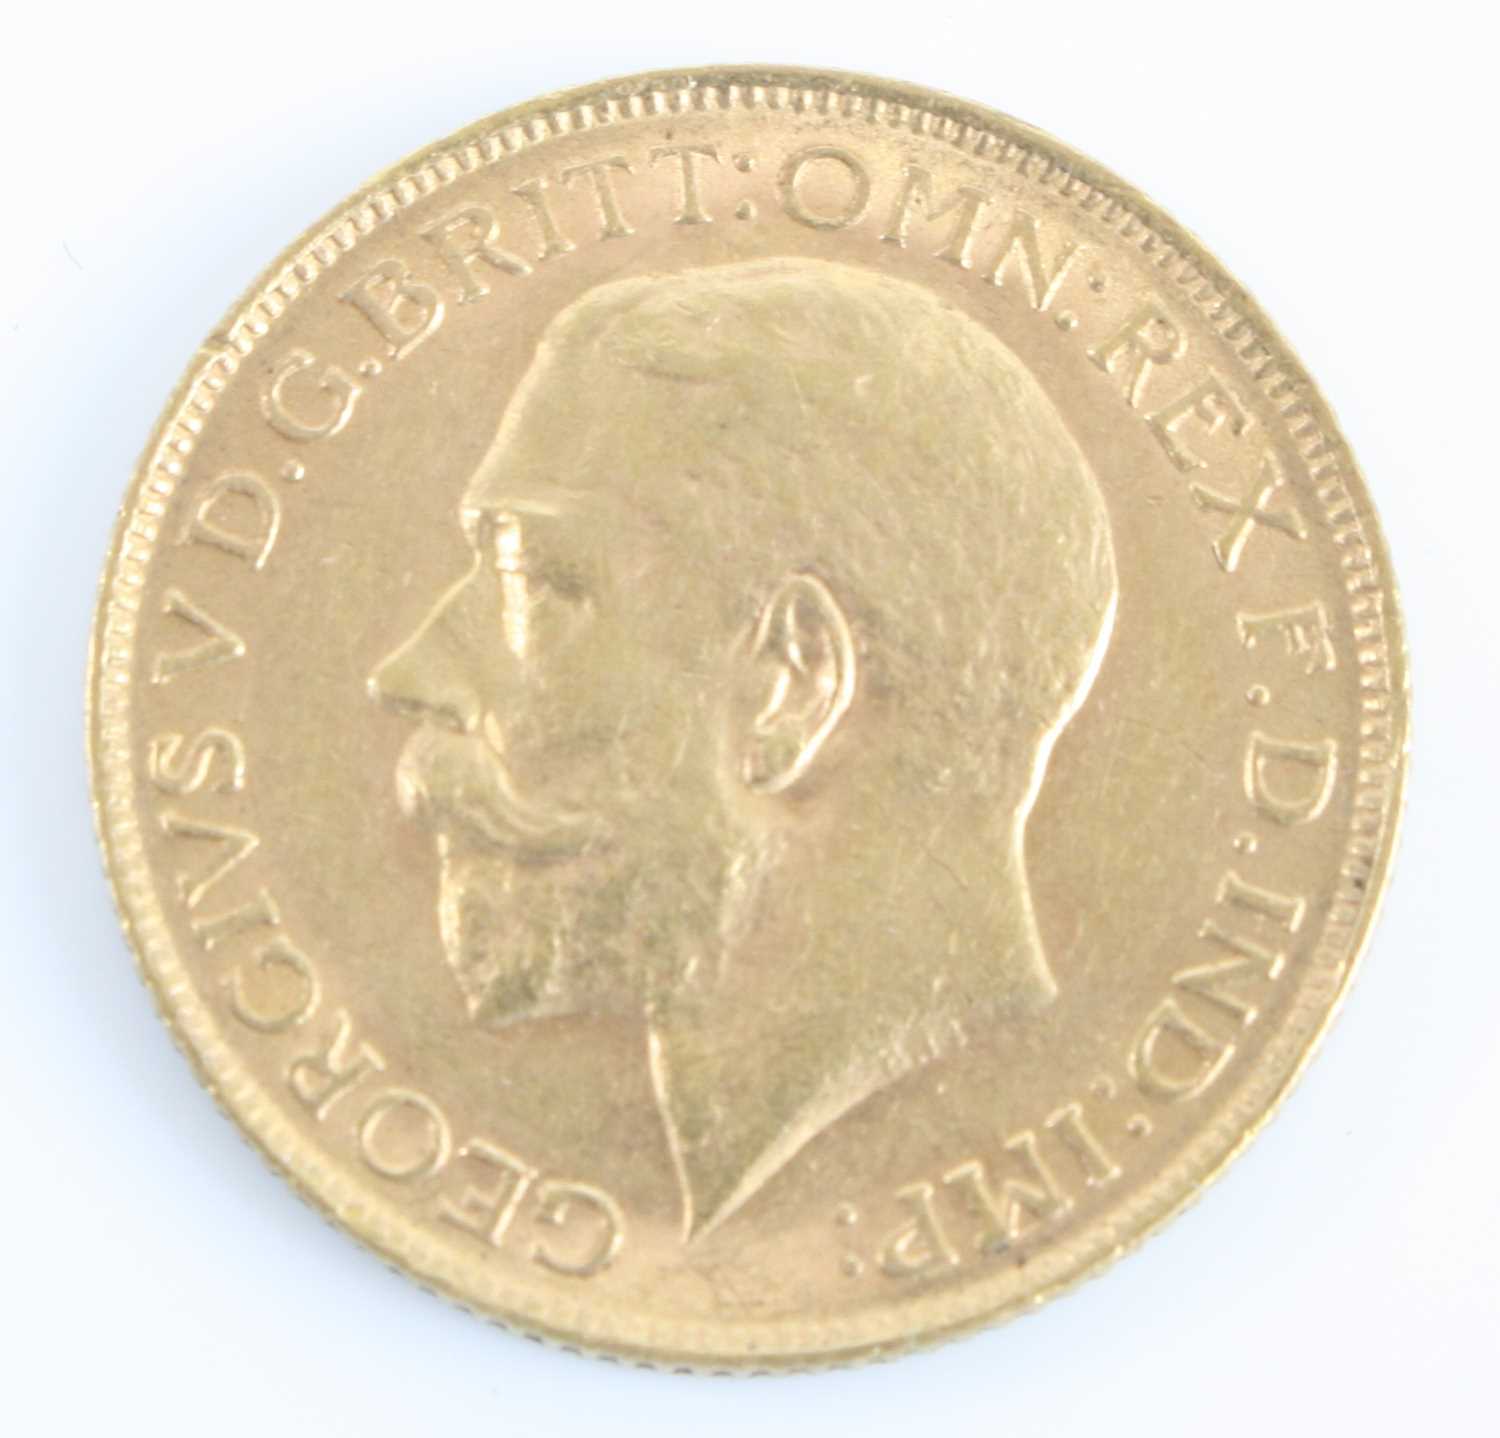 Great Britain, 1911 gold full sovereign, George V, rev: St George and Dragon above date. (1)